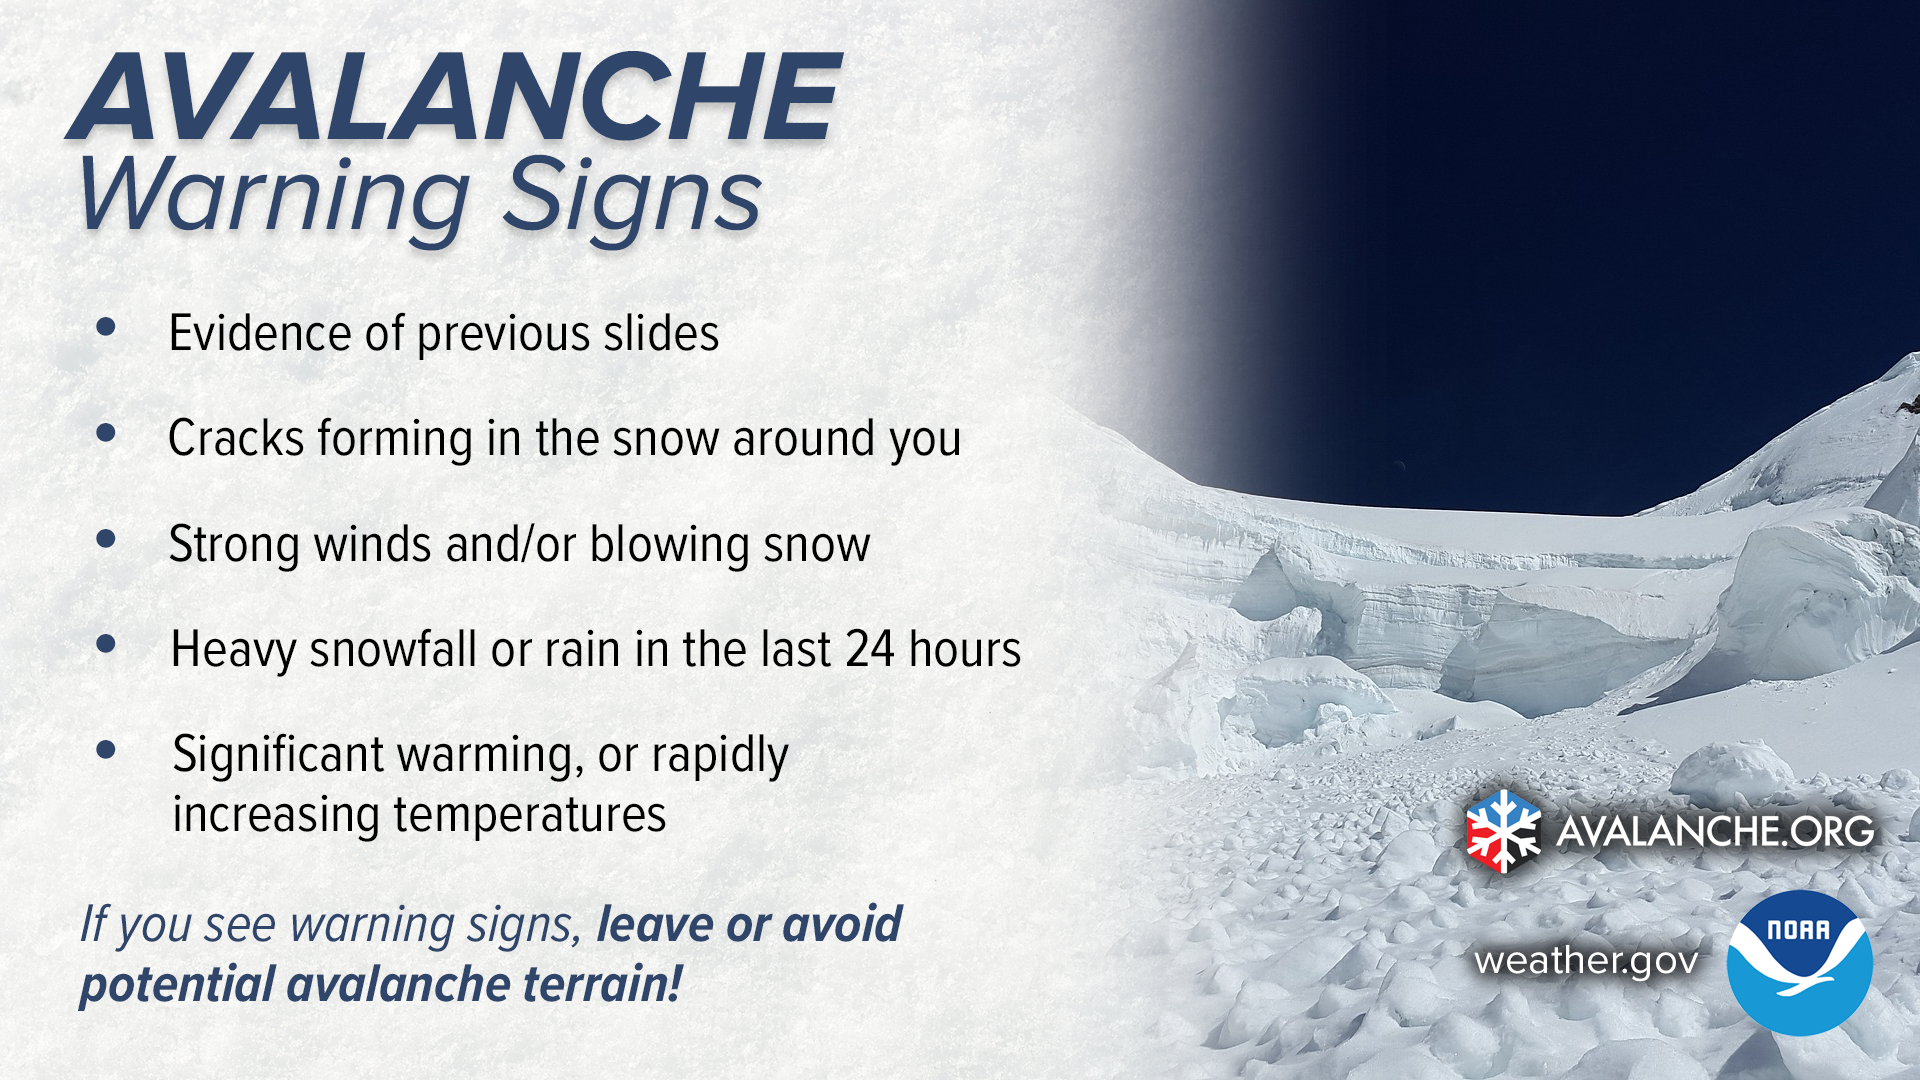 Image describing avalanche watches and warnings.